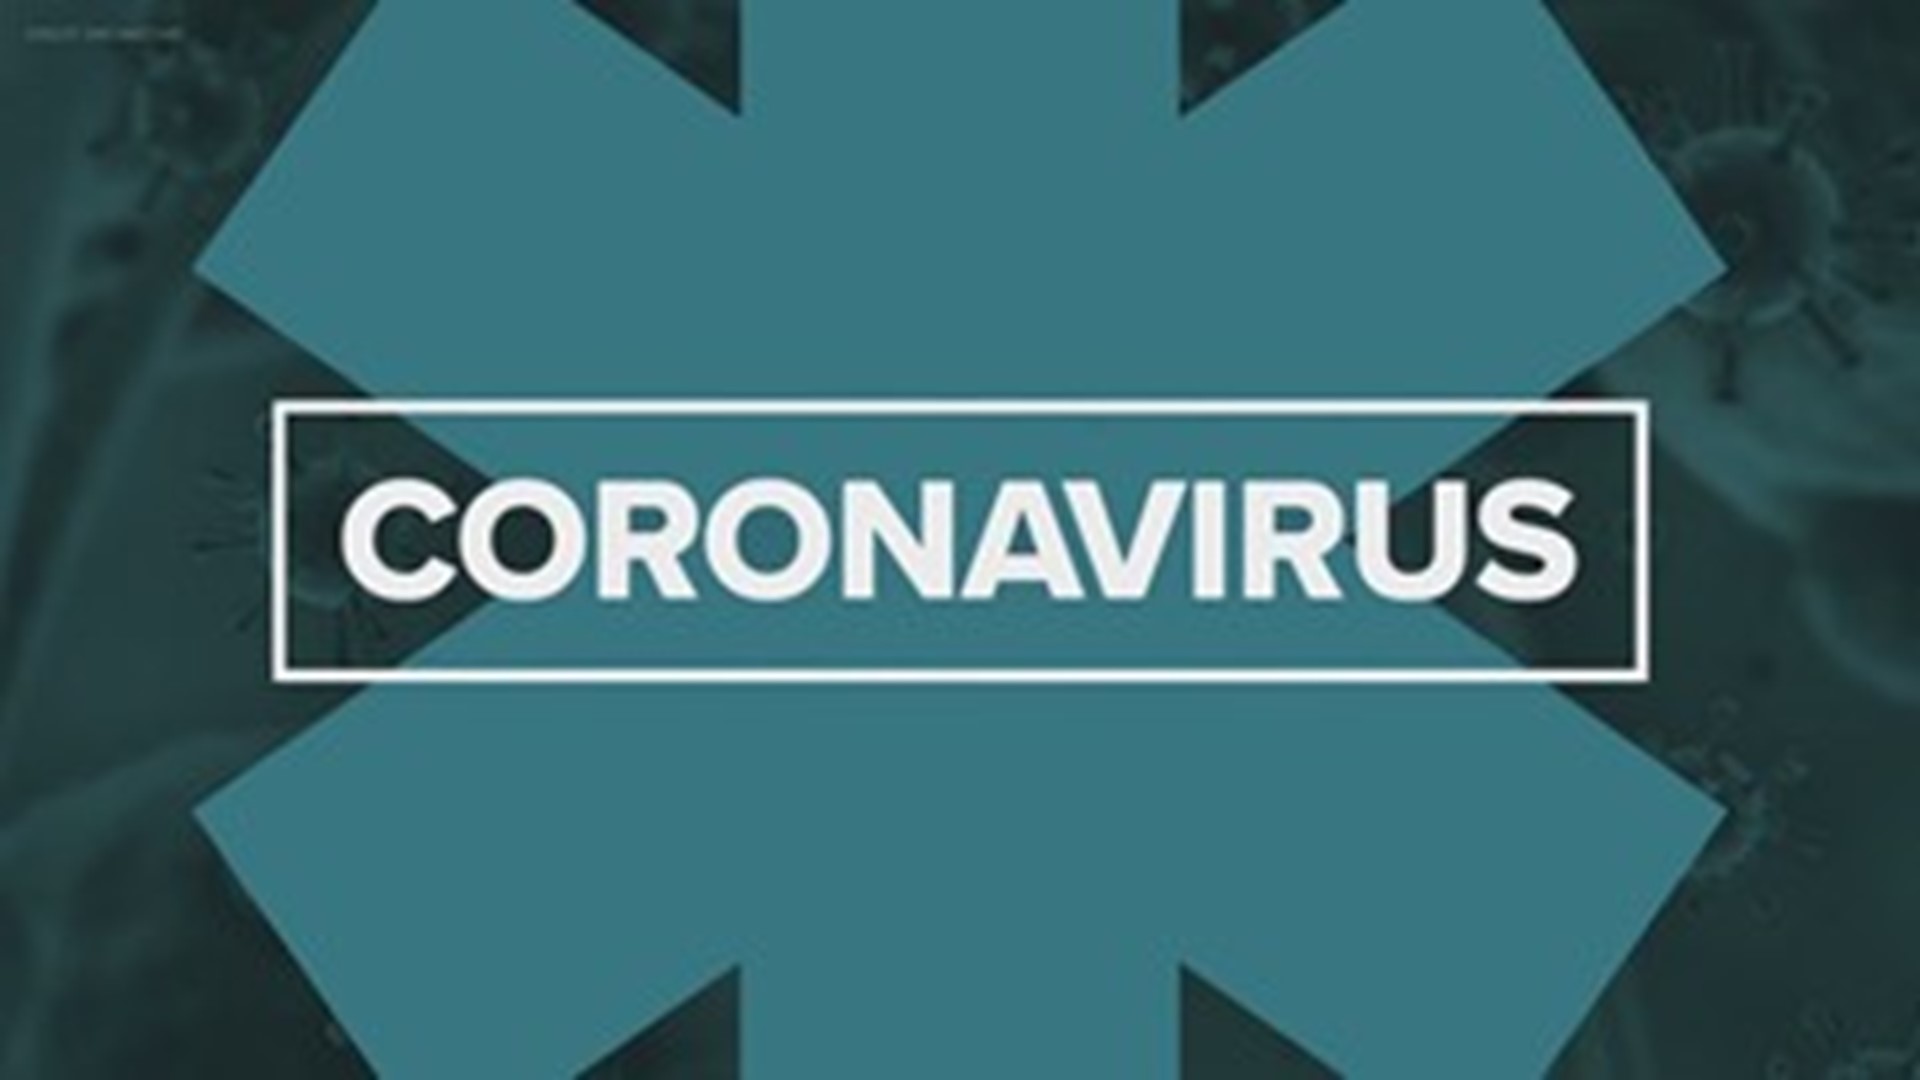 Indiana coronavirus updates: Disneyland becomes vaccination clinic, Air Force members get vaccine, airline passengers to US must get negative COVID-19 test — 1/13/21